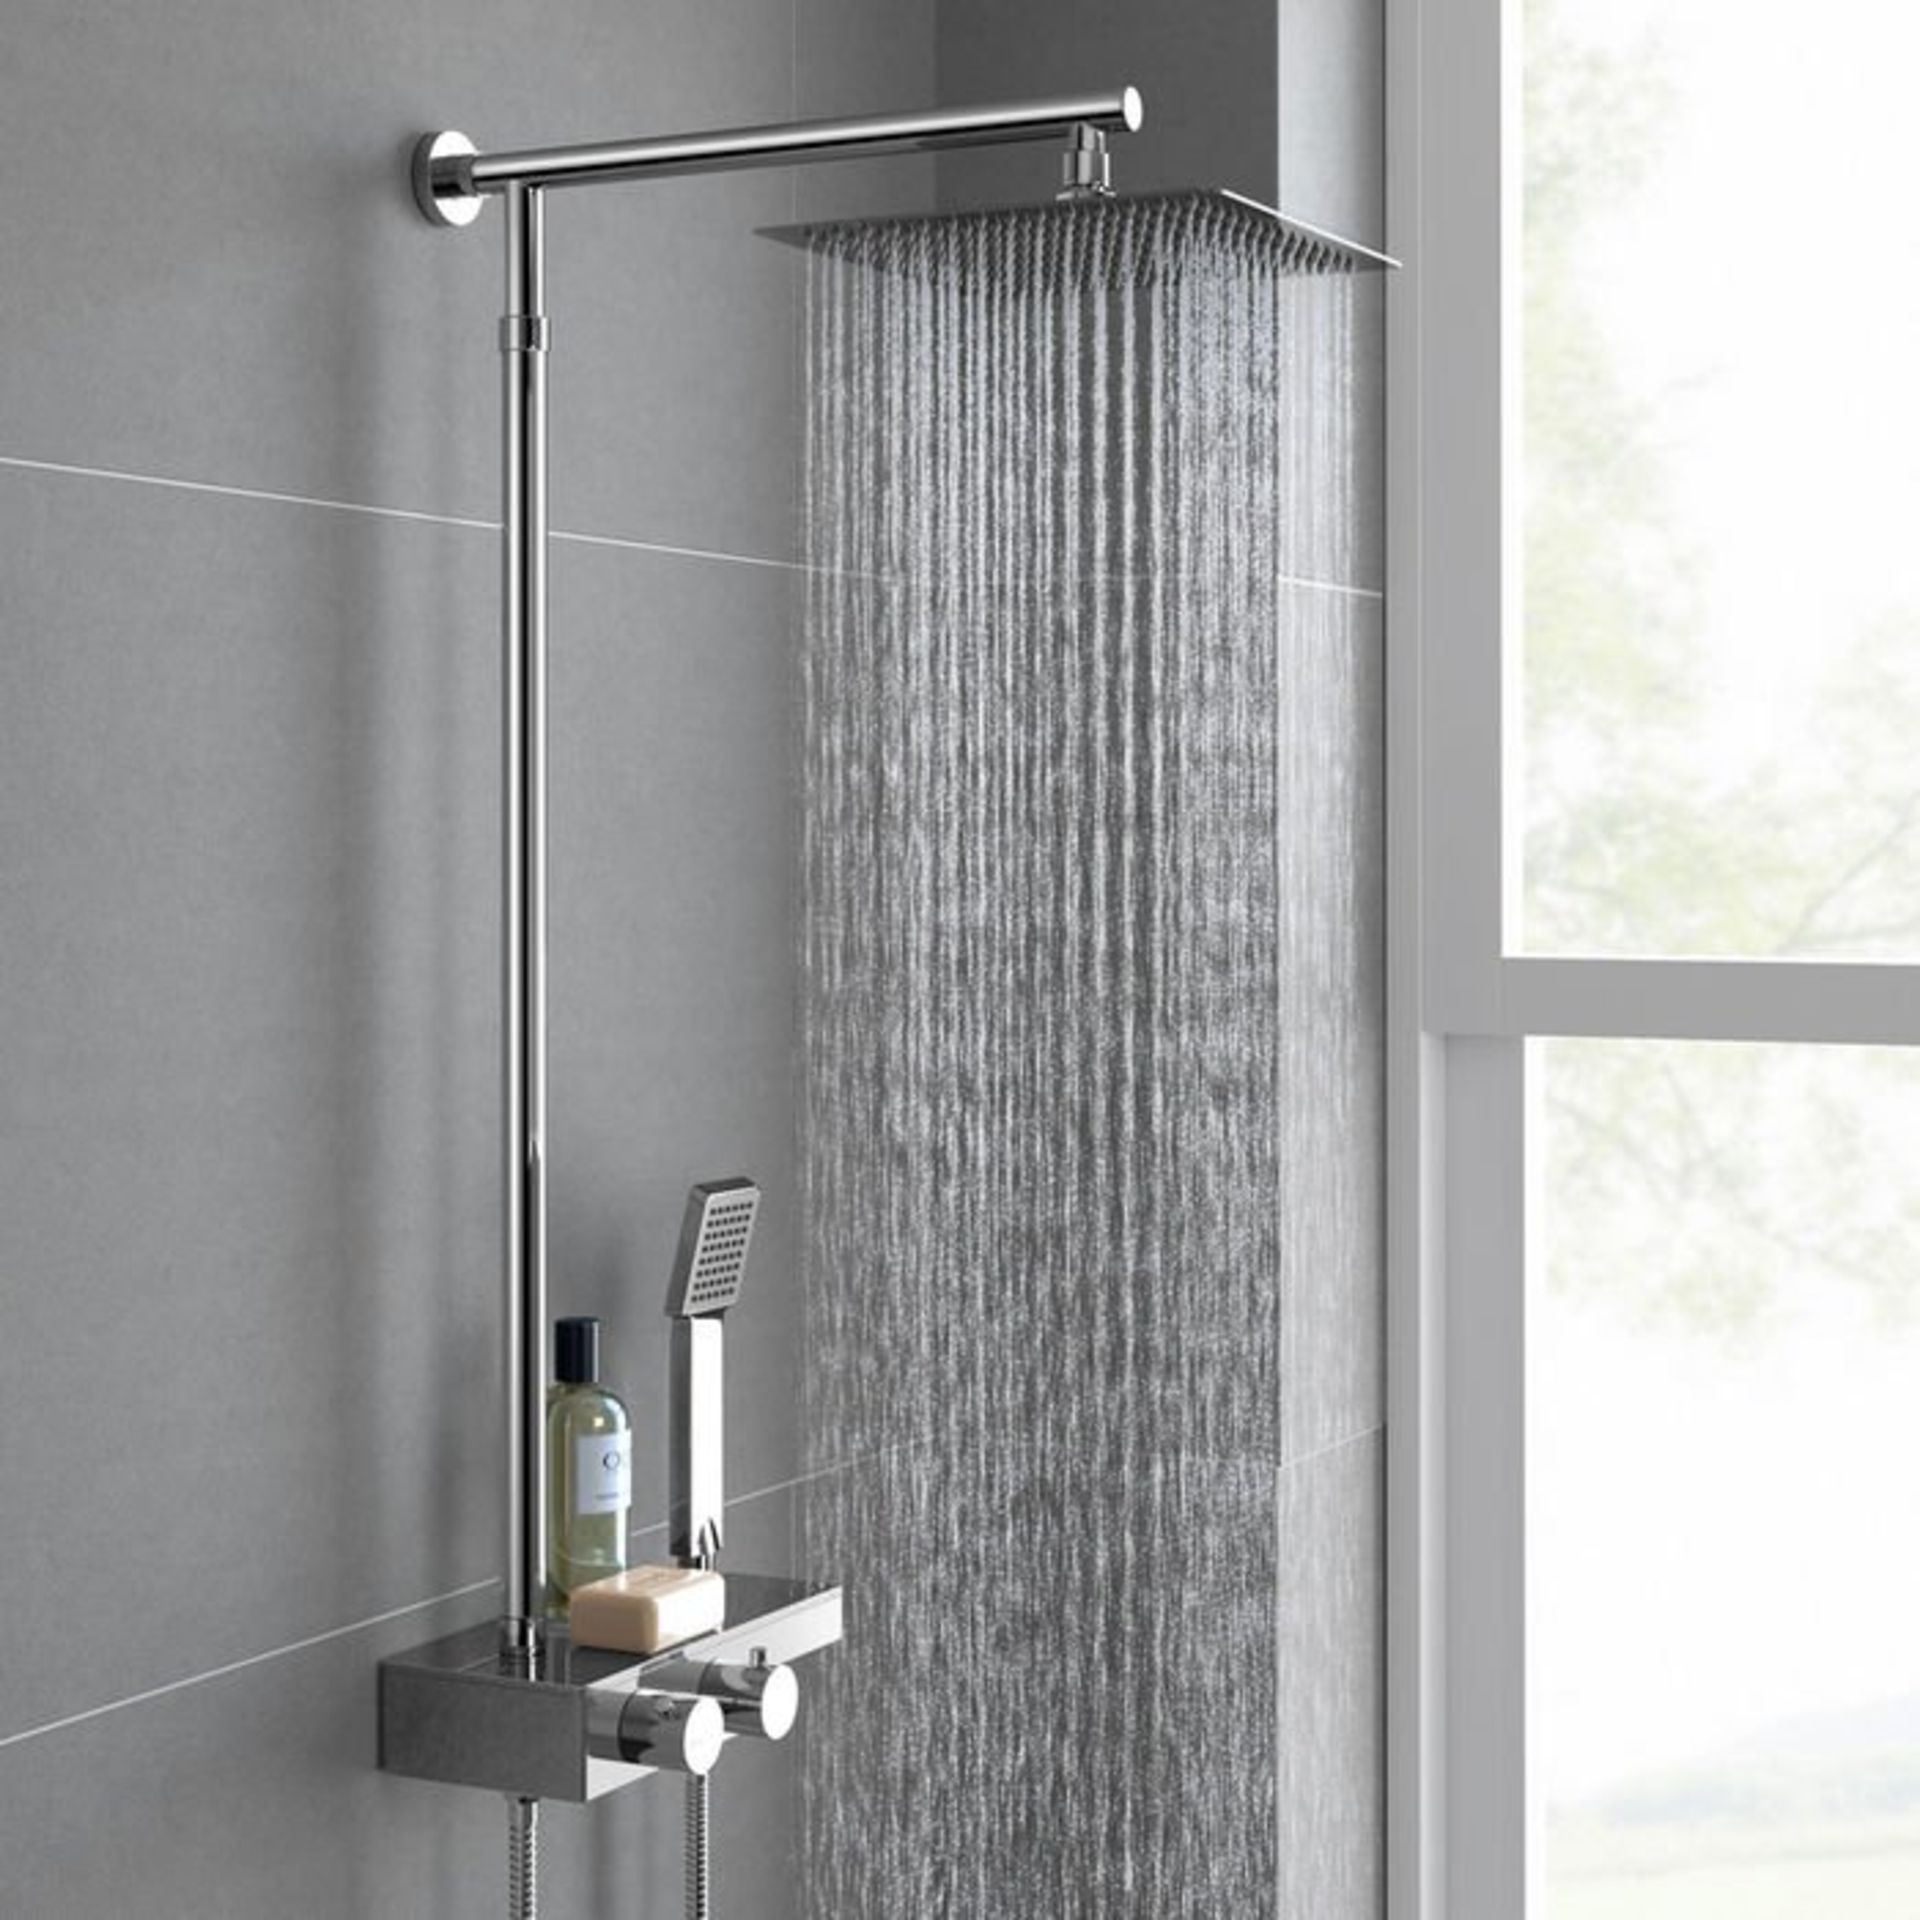 (Y157) Square Exposed Thermostatic Shower Shelf, Kit & Large Head. RRP £349.99. Style meets function - Image 3 of 6